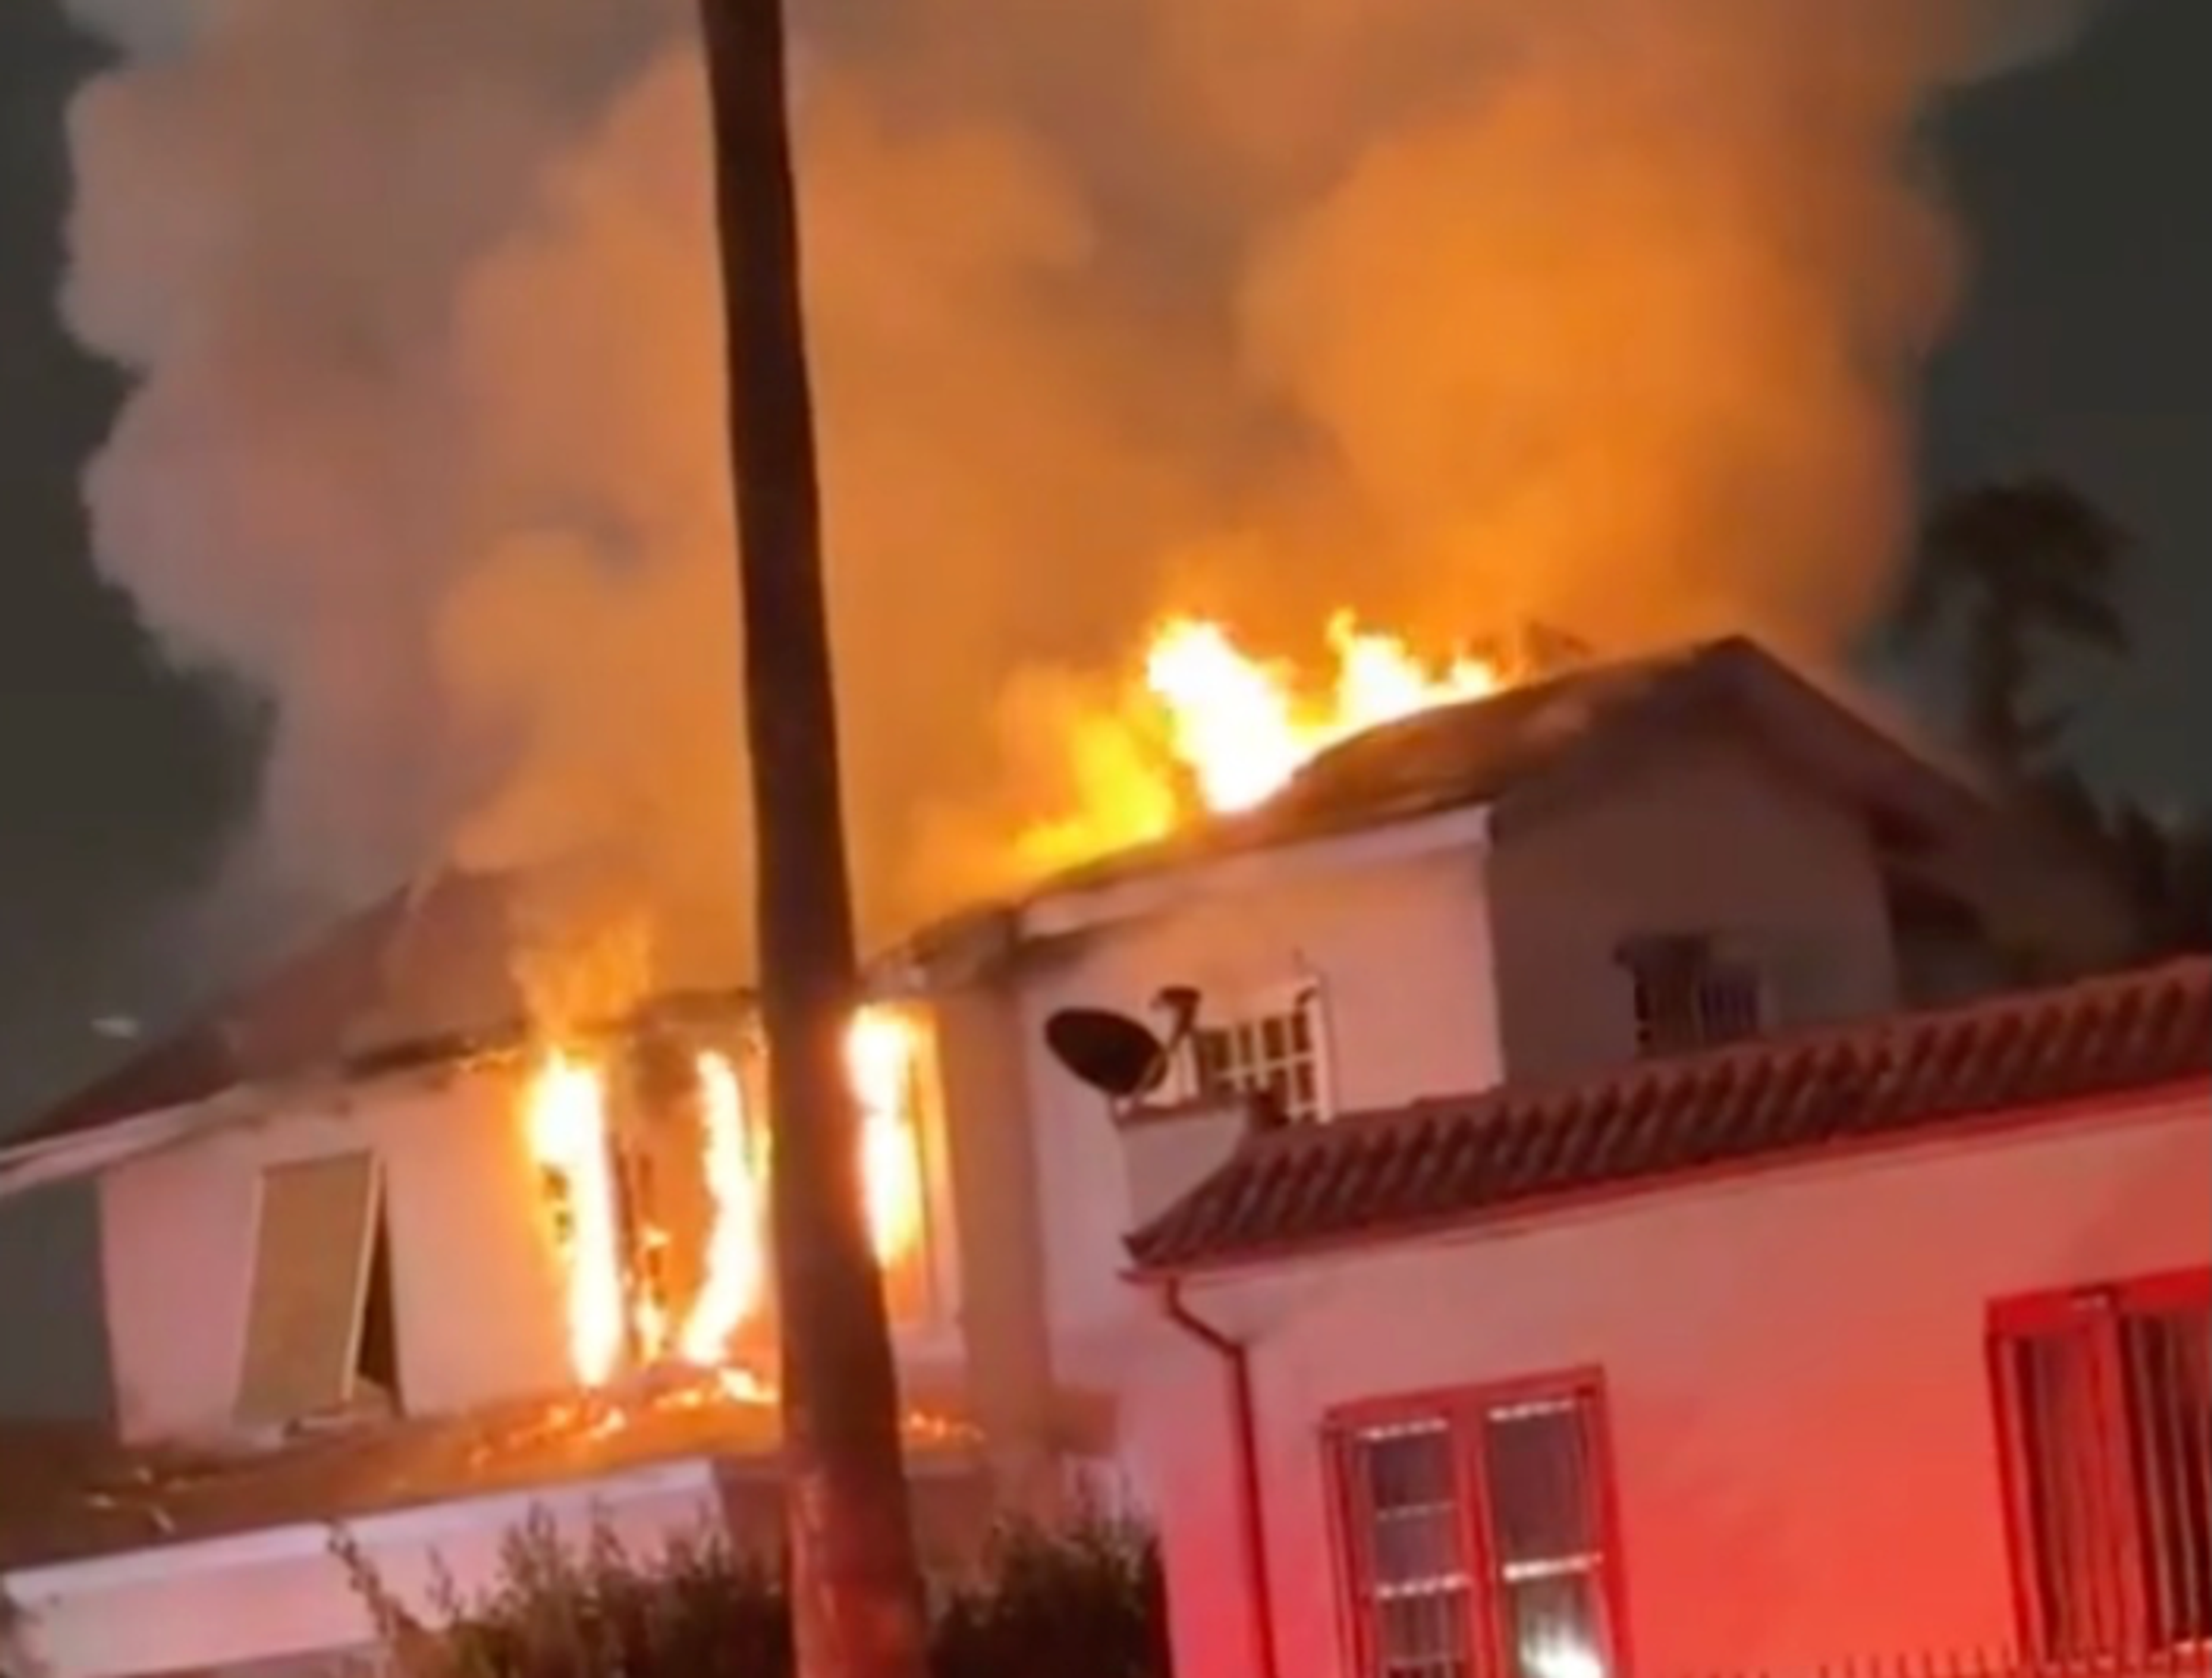 7406 S. Figueroa Street, a two-story apartment building, boarded up and on fire against the night sky.